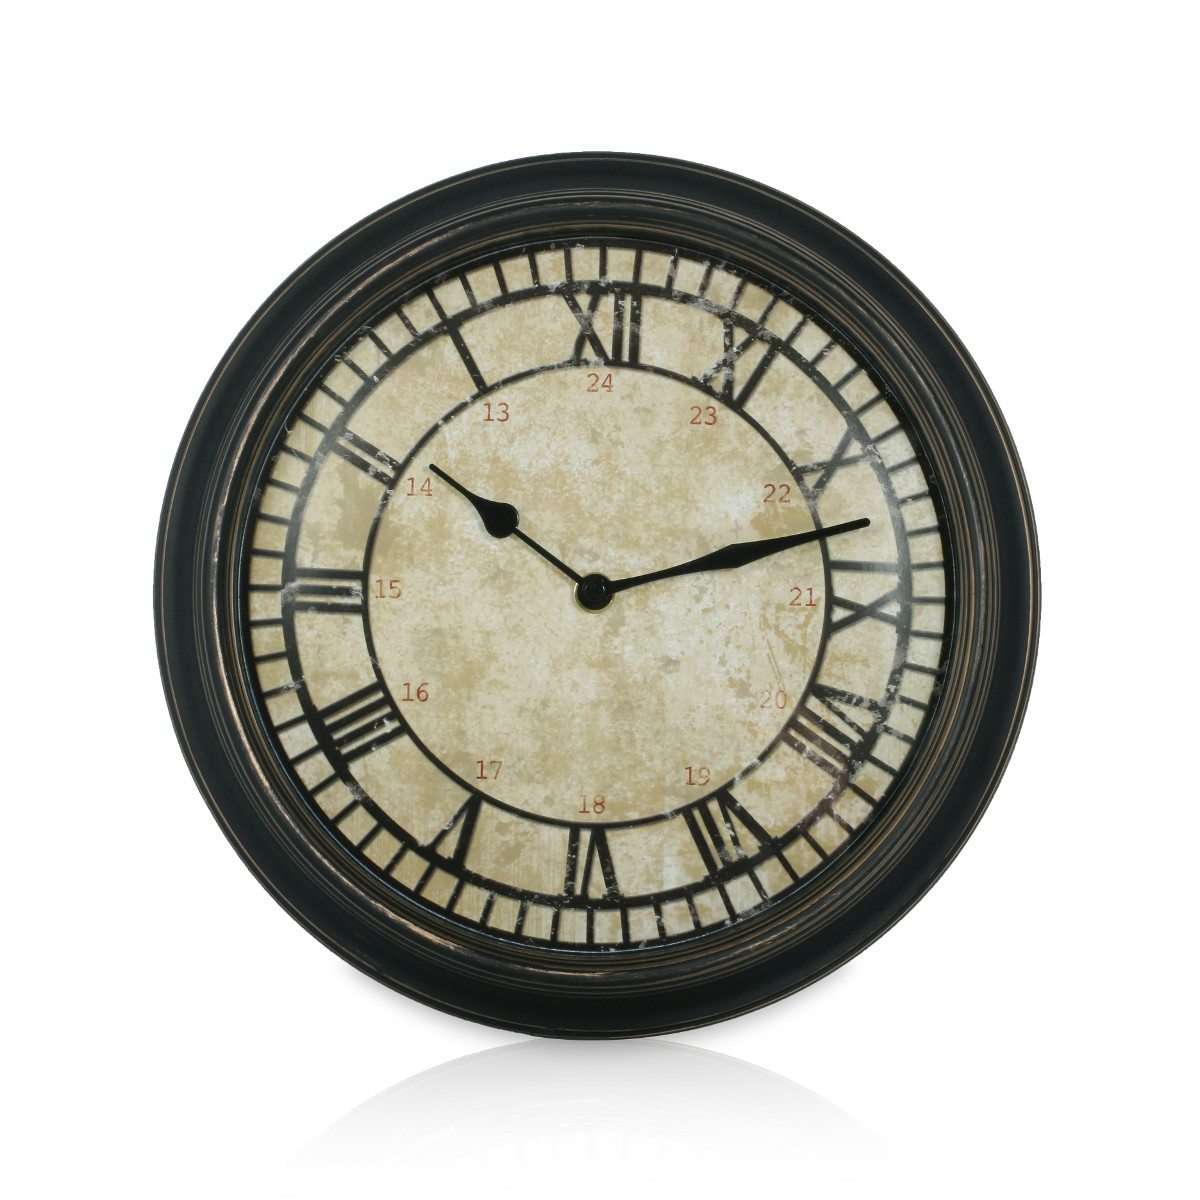 Bemuse and baffle your friends with the wacky Reverse Clock. The wall